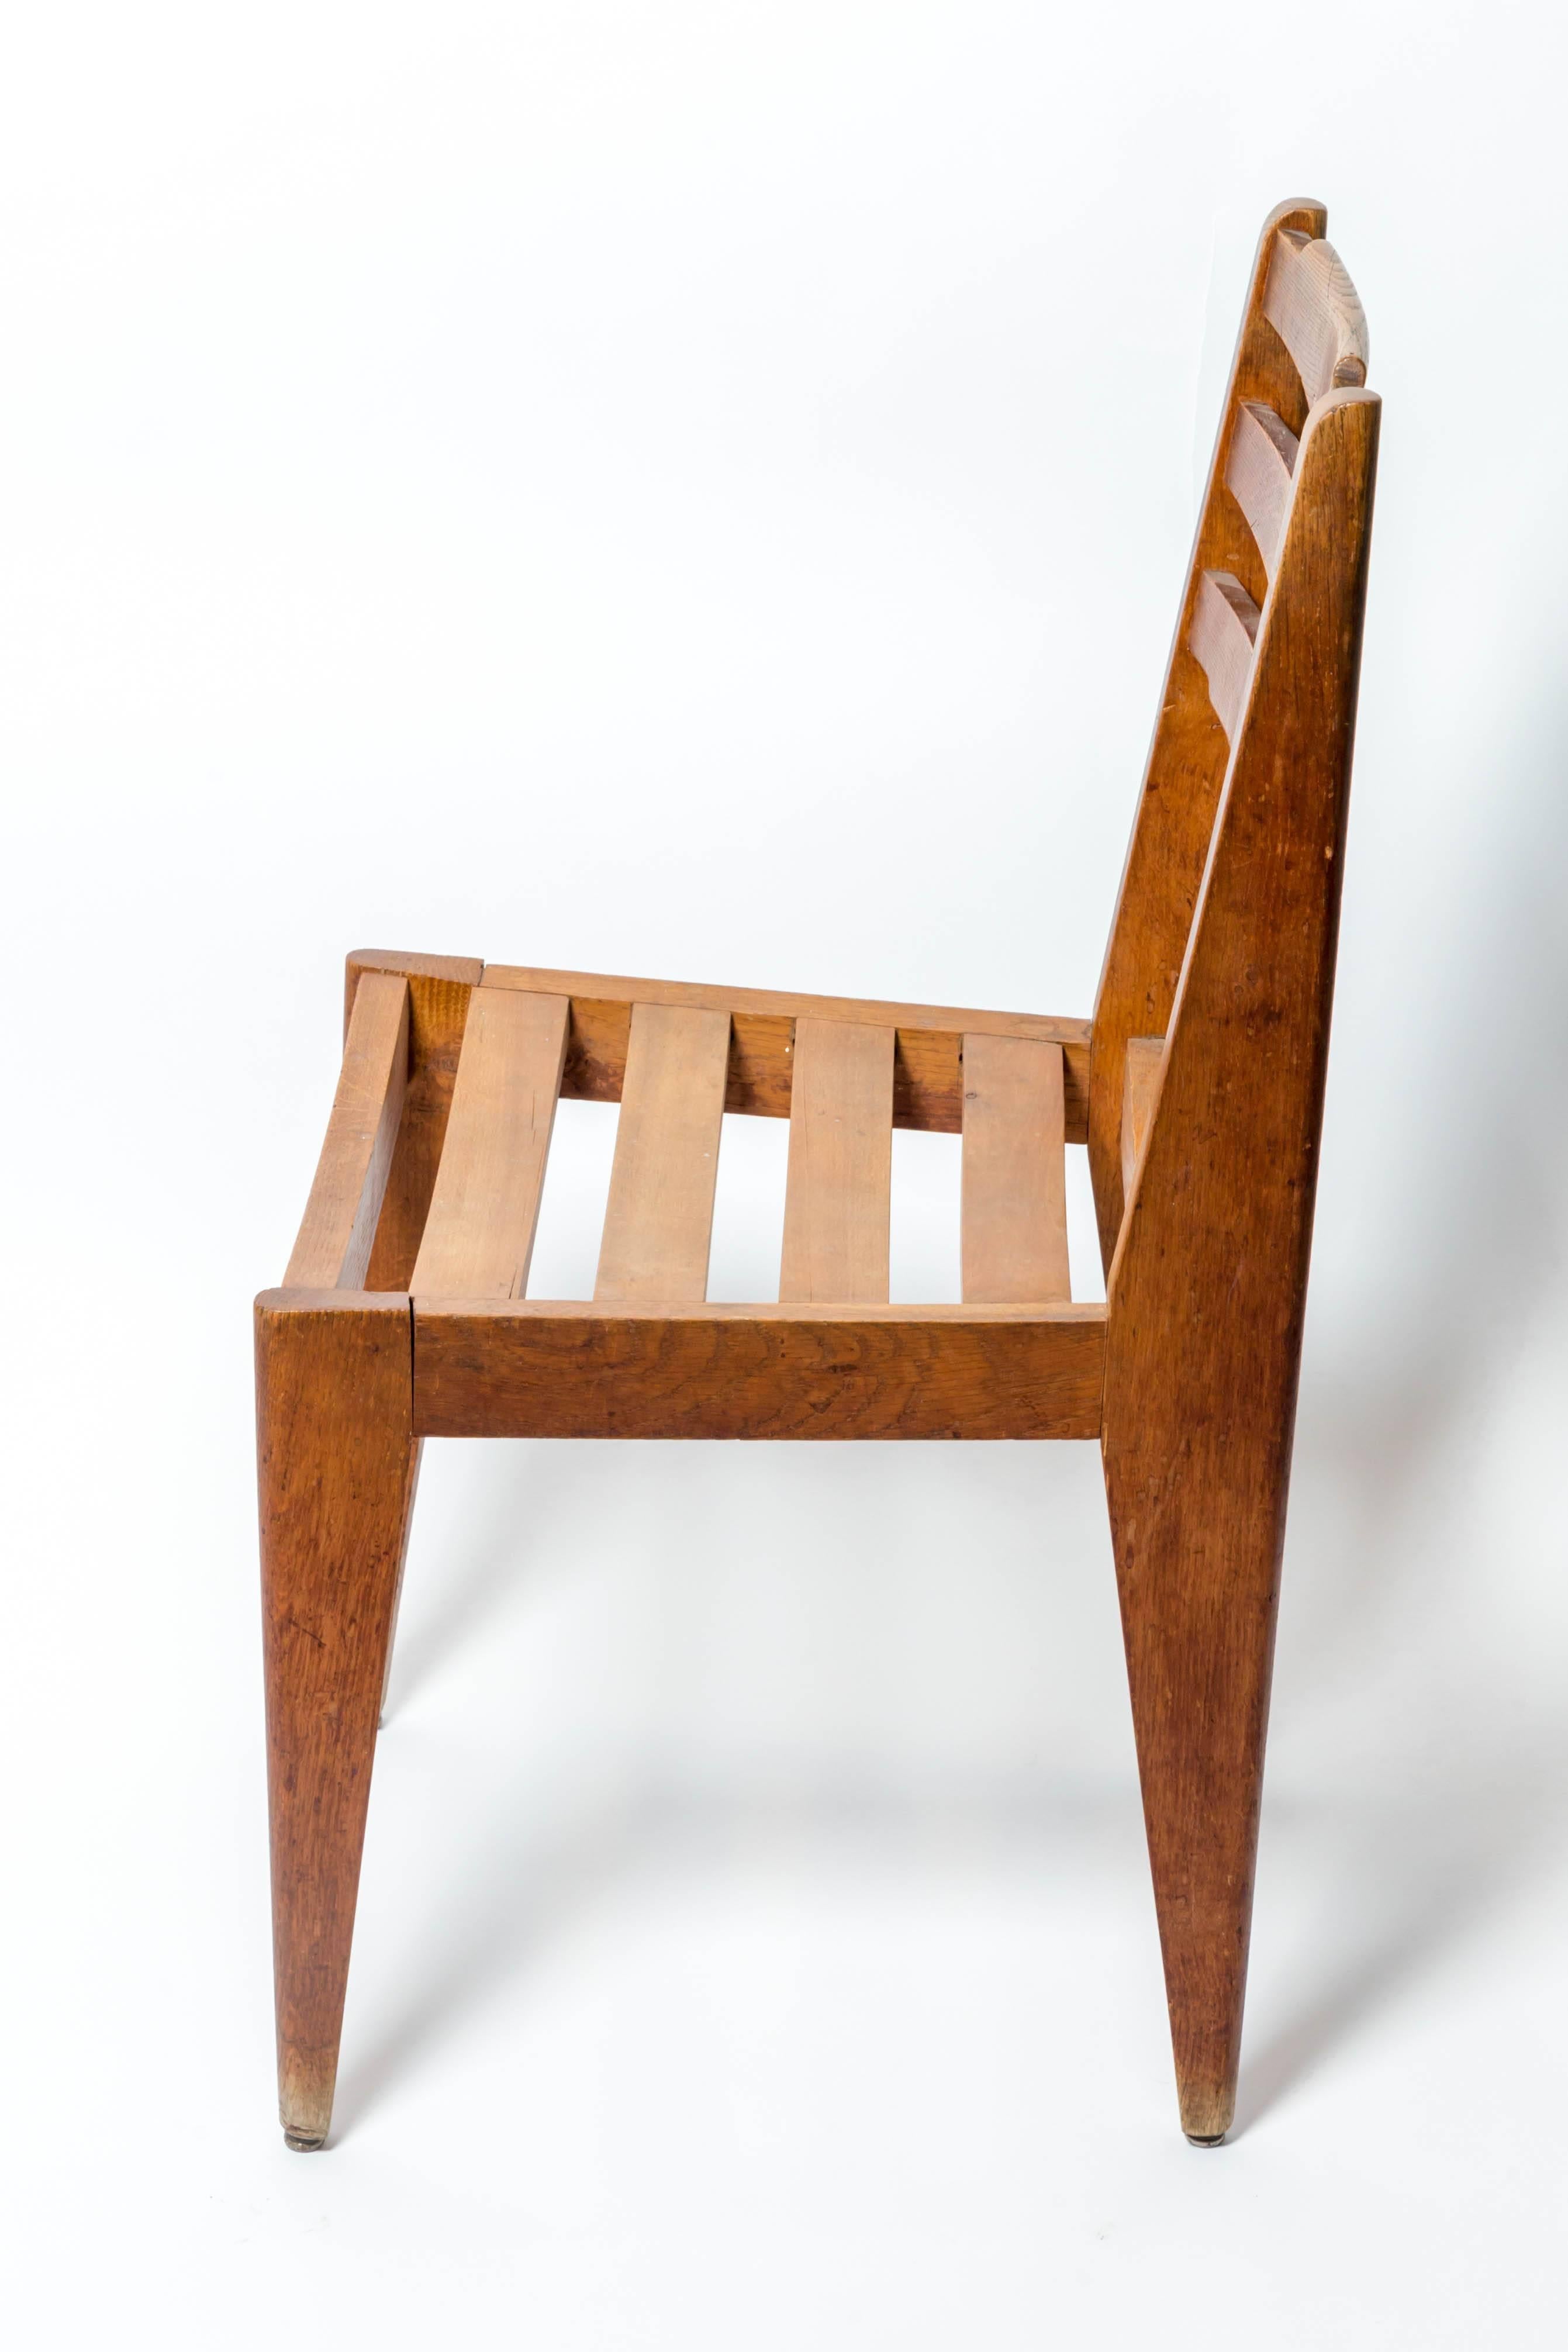 Mid-20th Century Wooden Chair Attributed to Gustave Gautier, France, c. 1950s For Sale